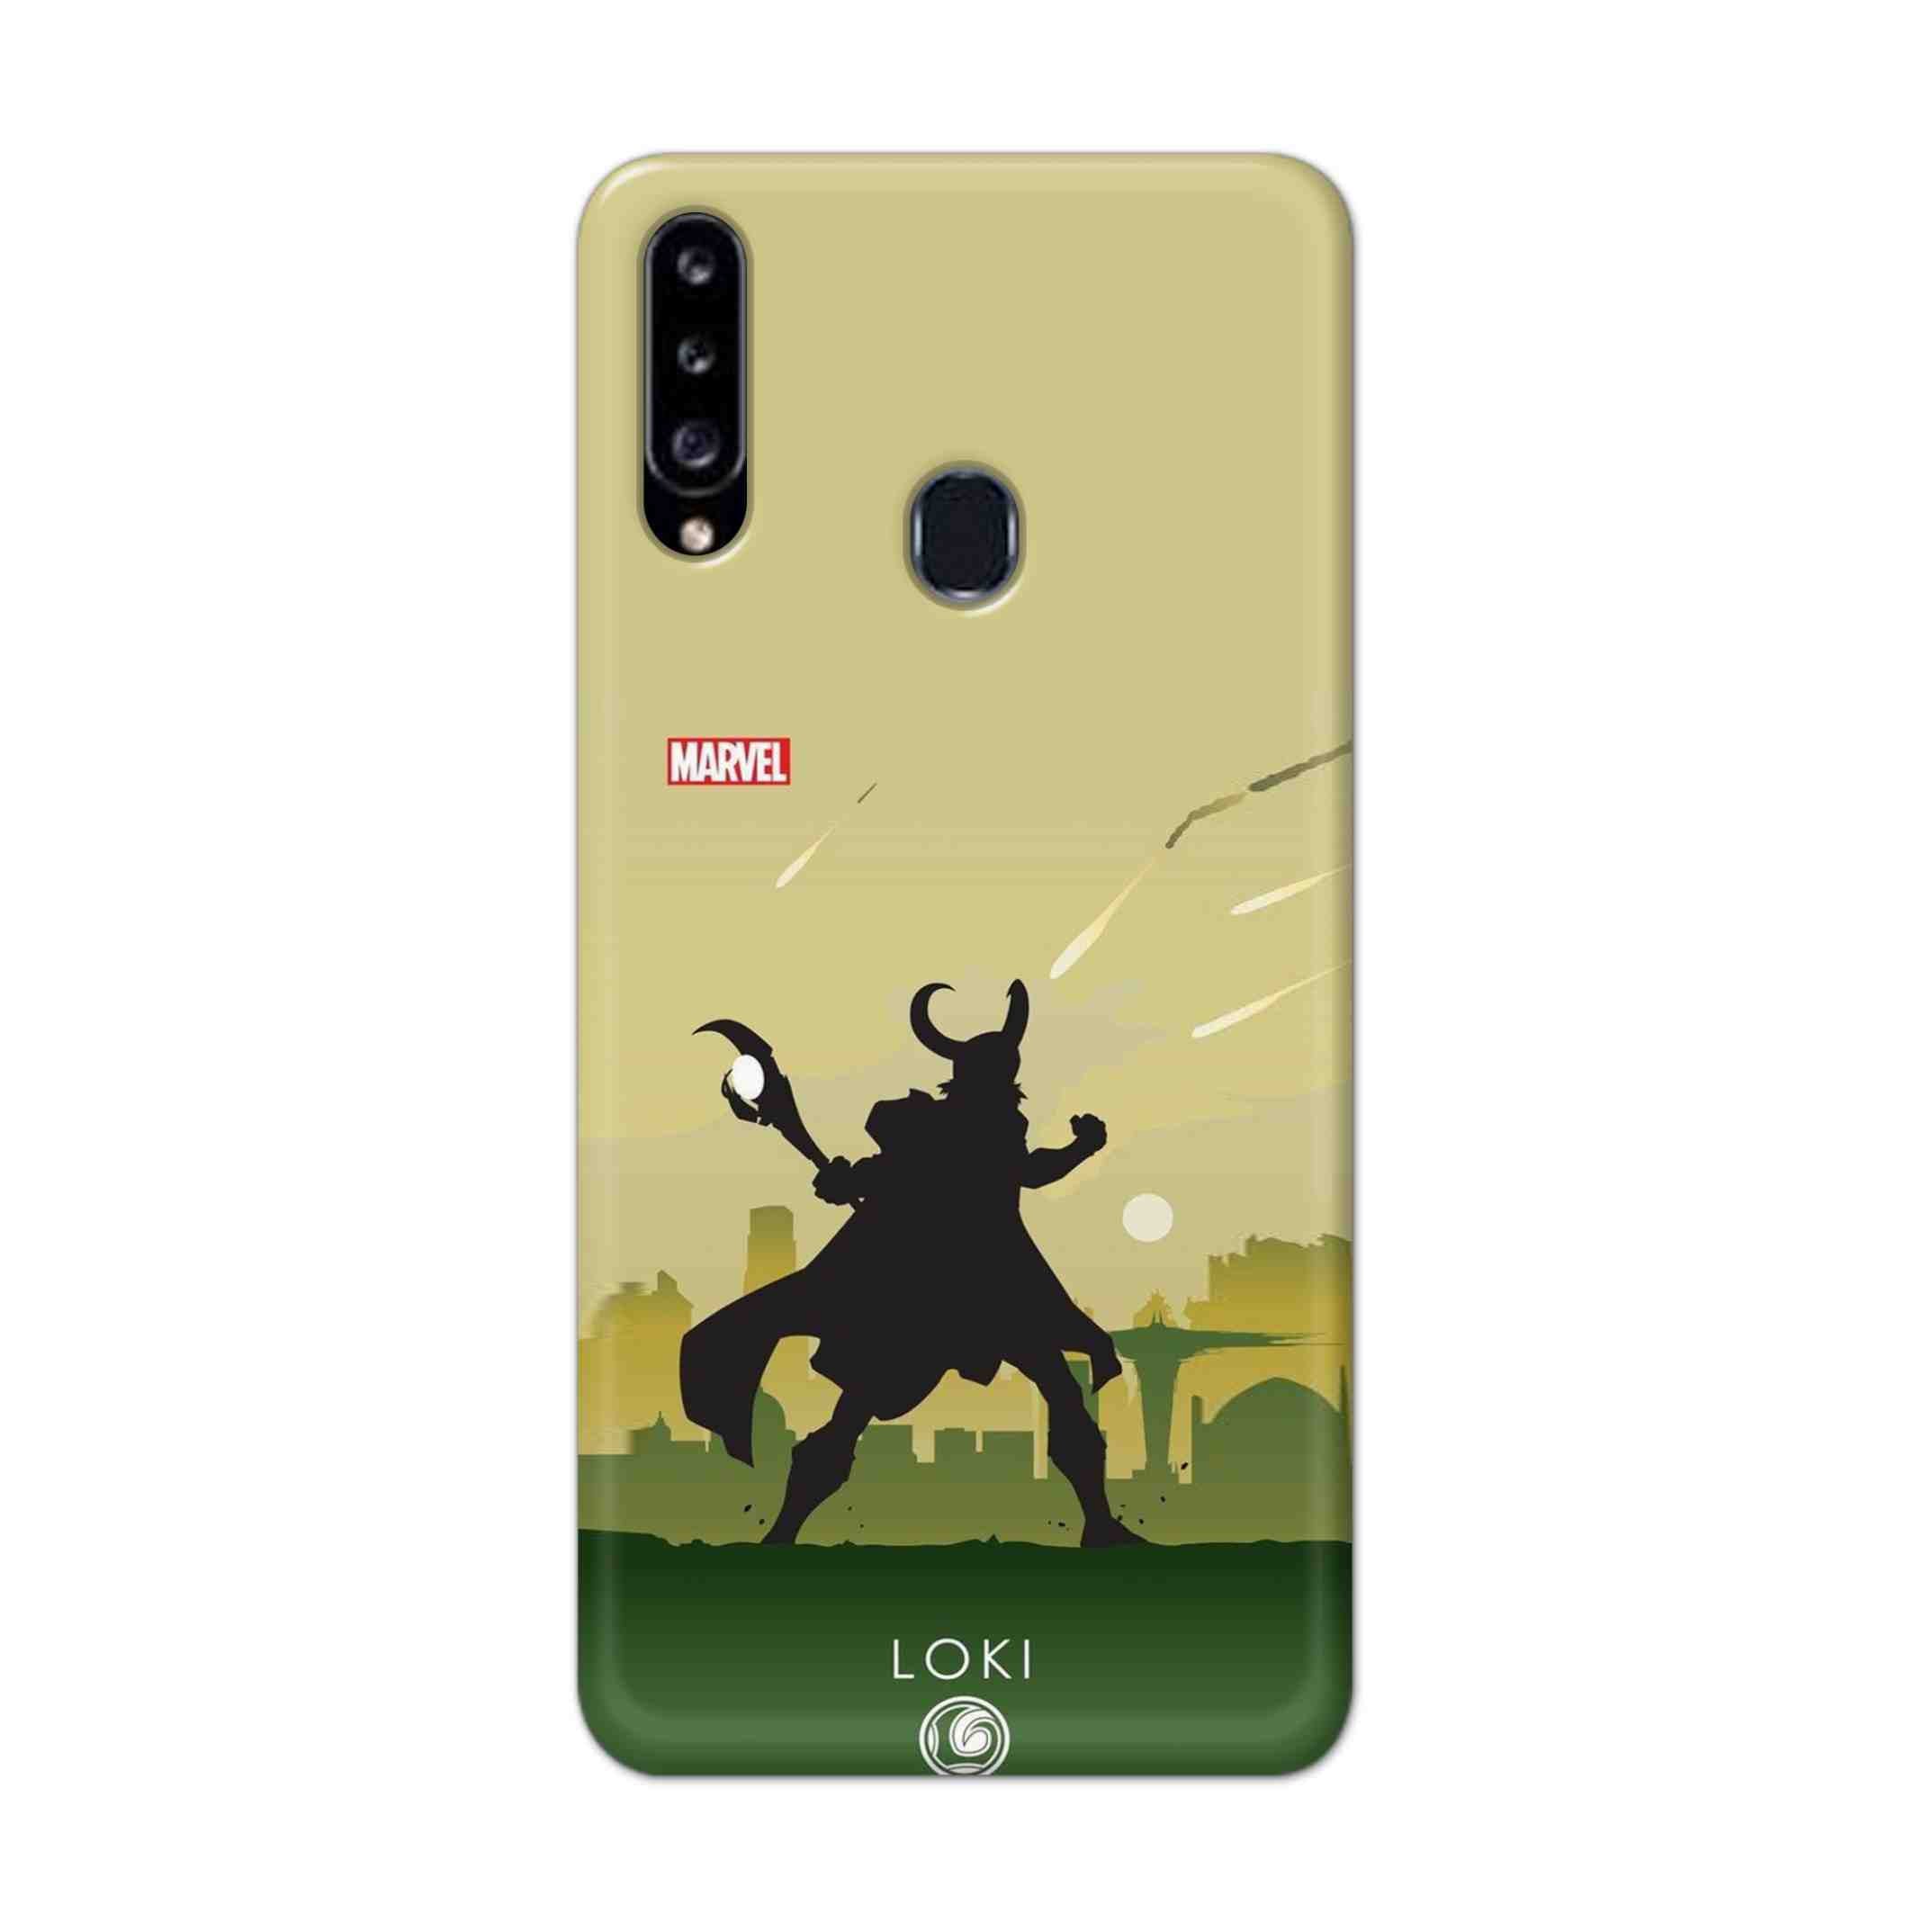 Buy Loki Hard Back Mobile Phone Case Cover For Samsung Galaxy A21 Online